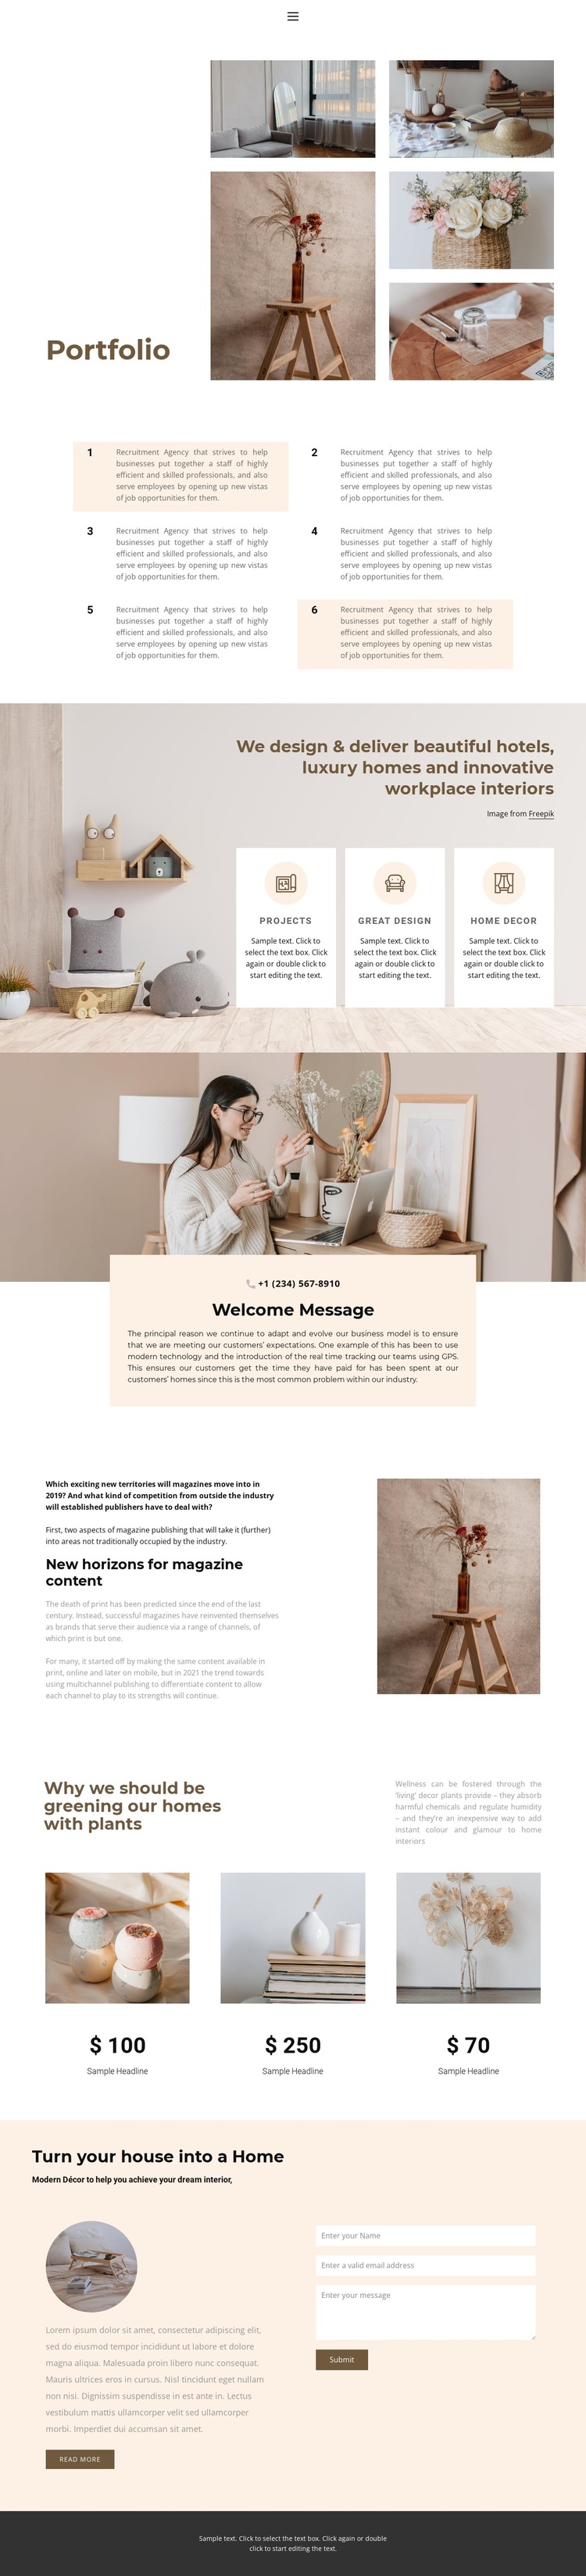 Decorate your home HTML5 Template